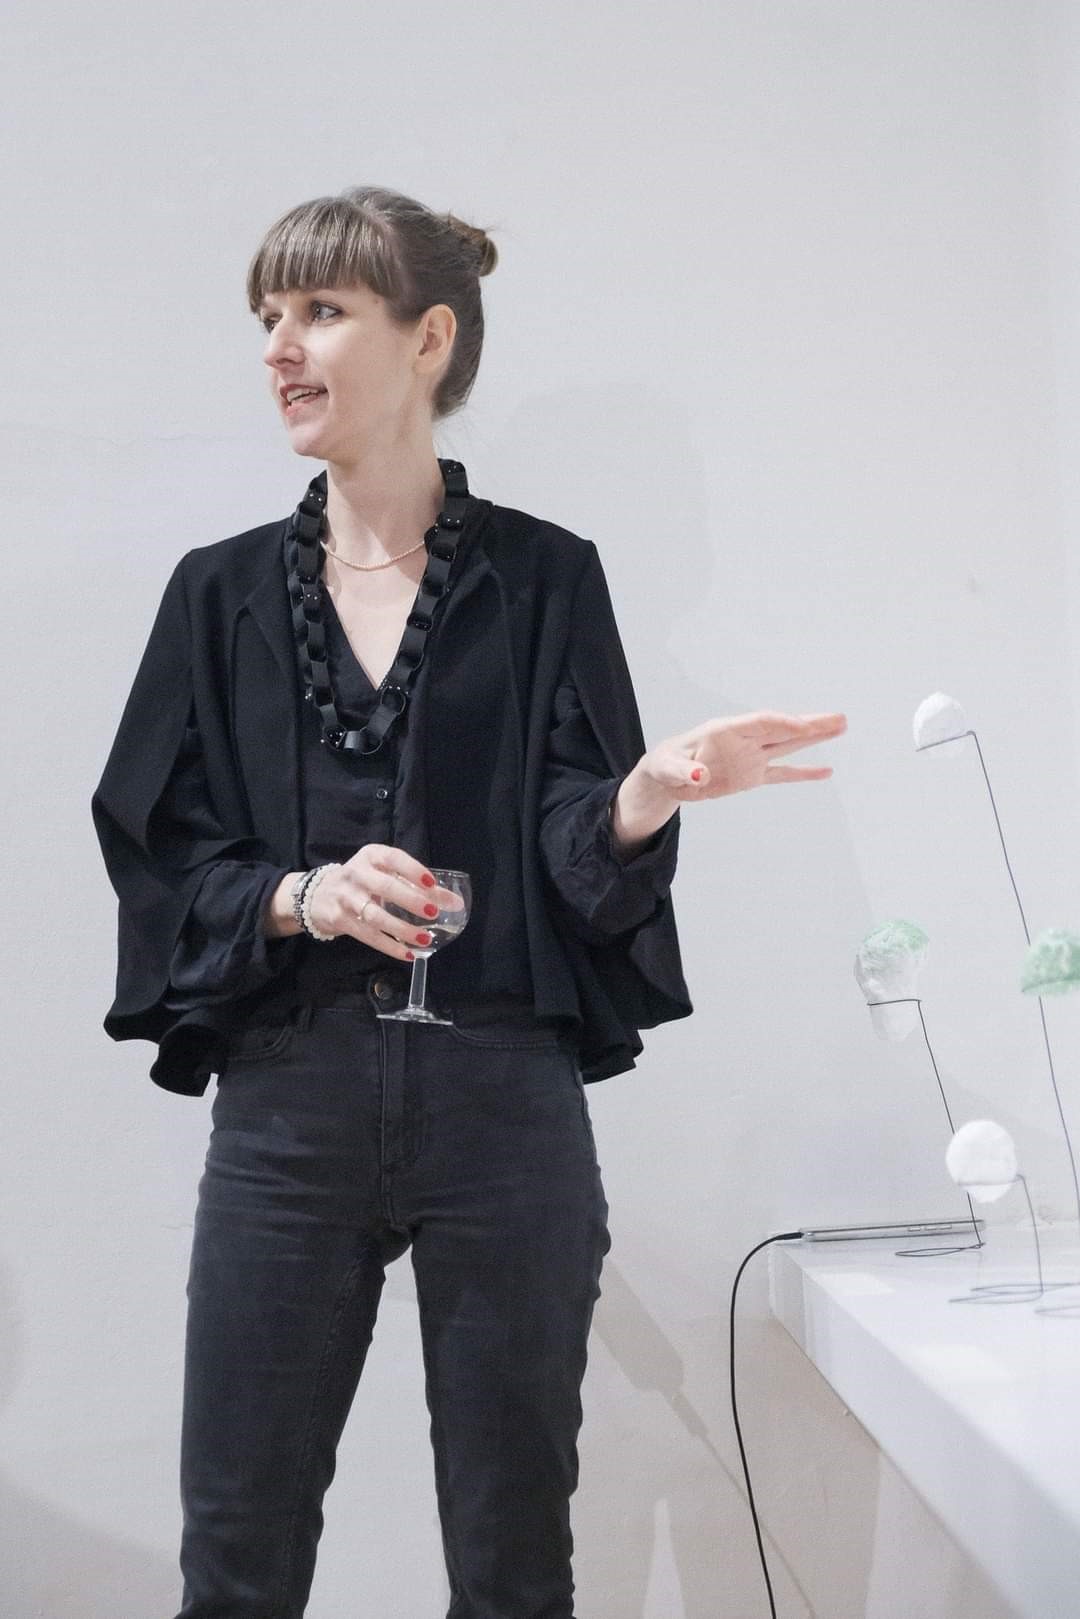 INTERACTING LECTURES - Katharina Reich - IsSaltArt